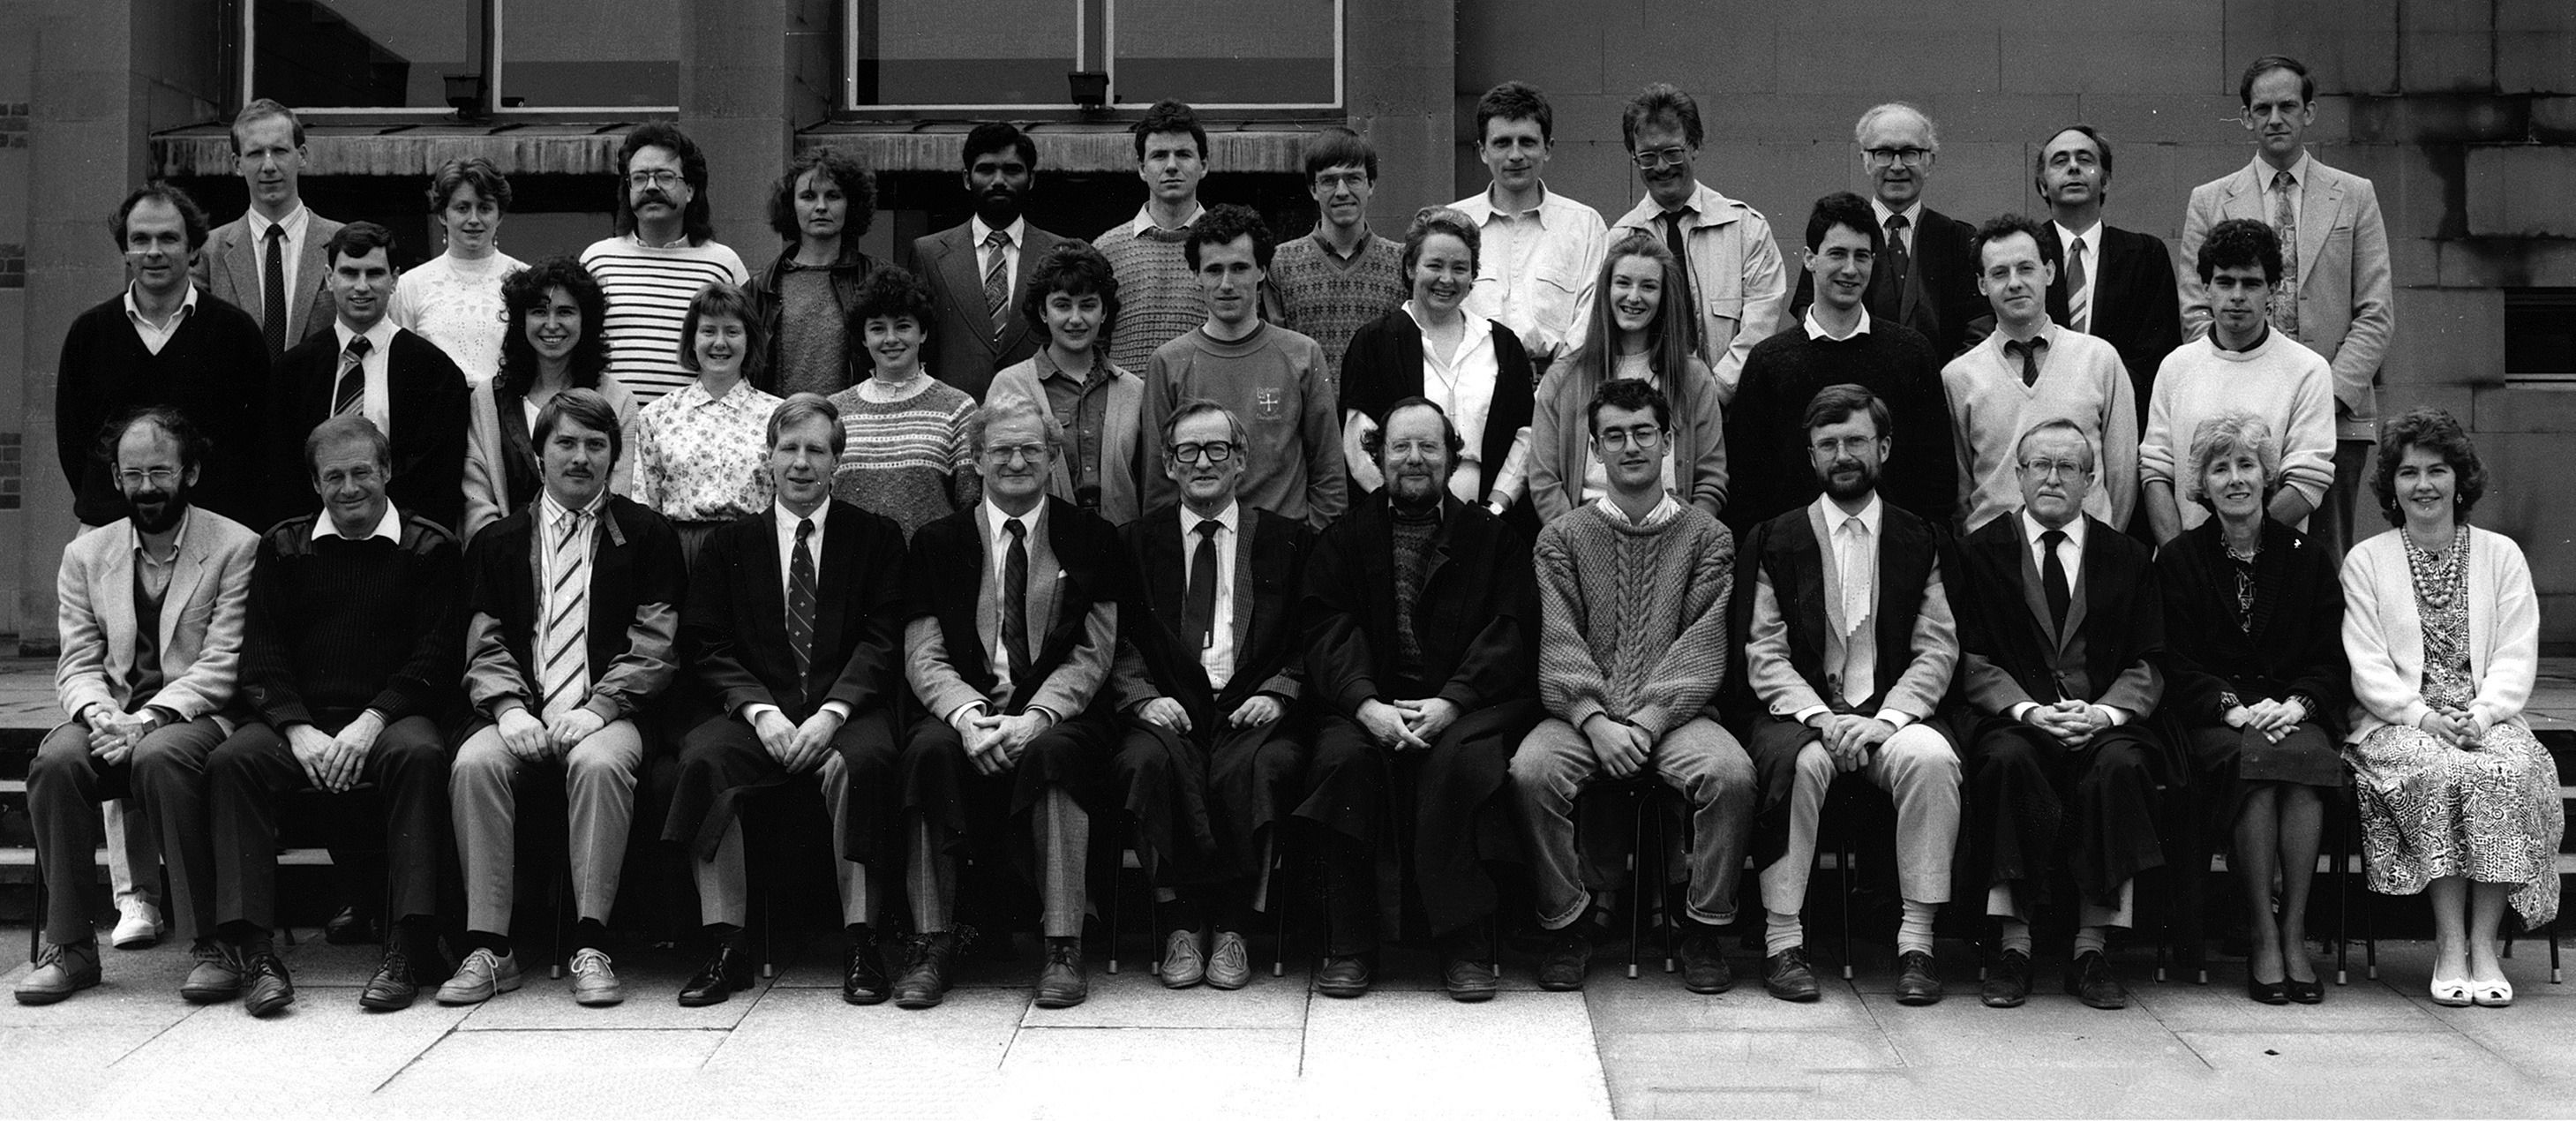 Geography Department Postgraduate Group Photo from 1988